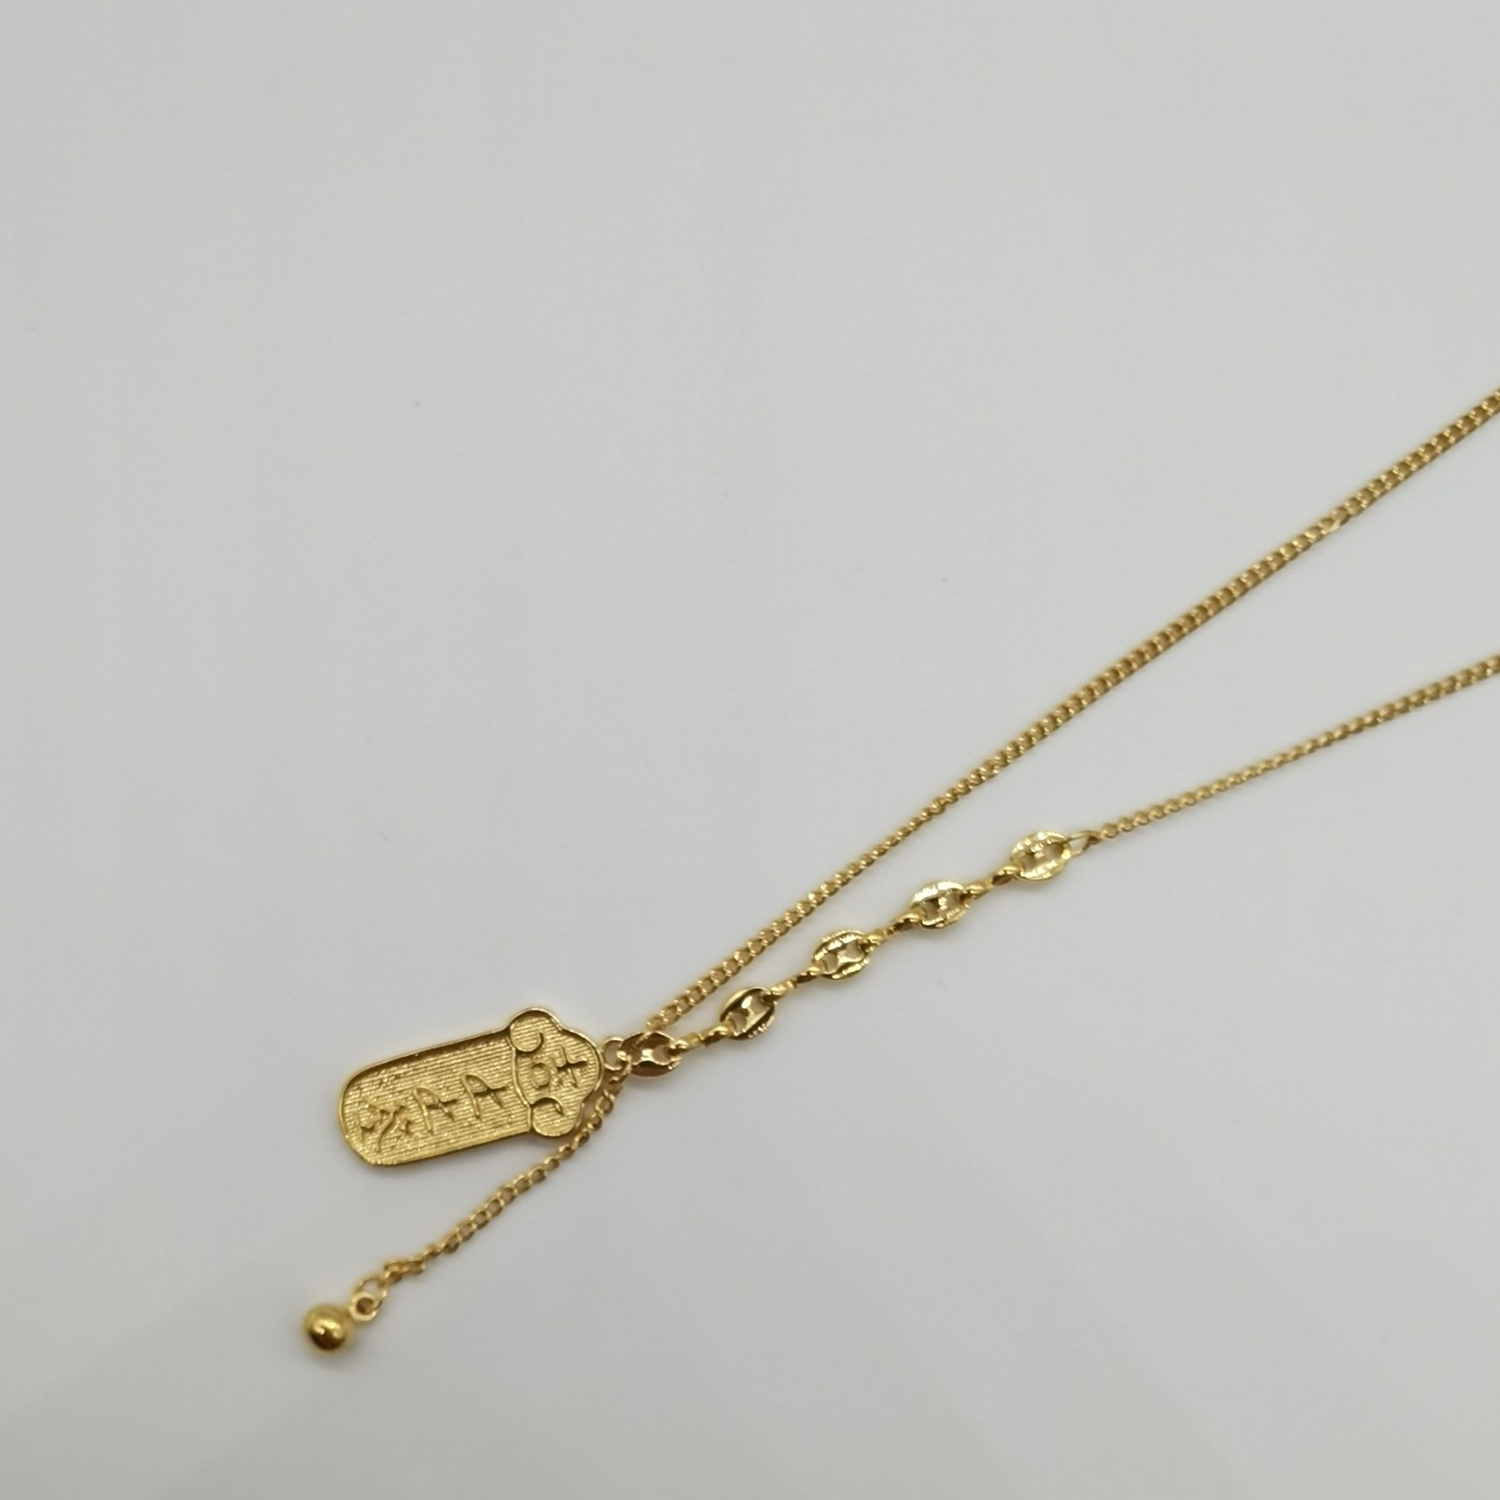 Alluvial gold vacuum electroplating 24K gold signed Xiangyun necklace